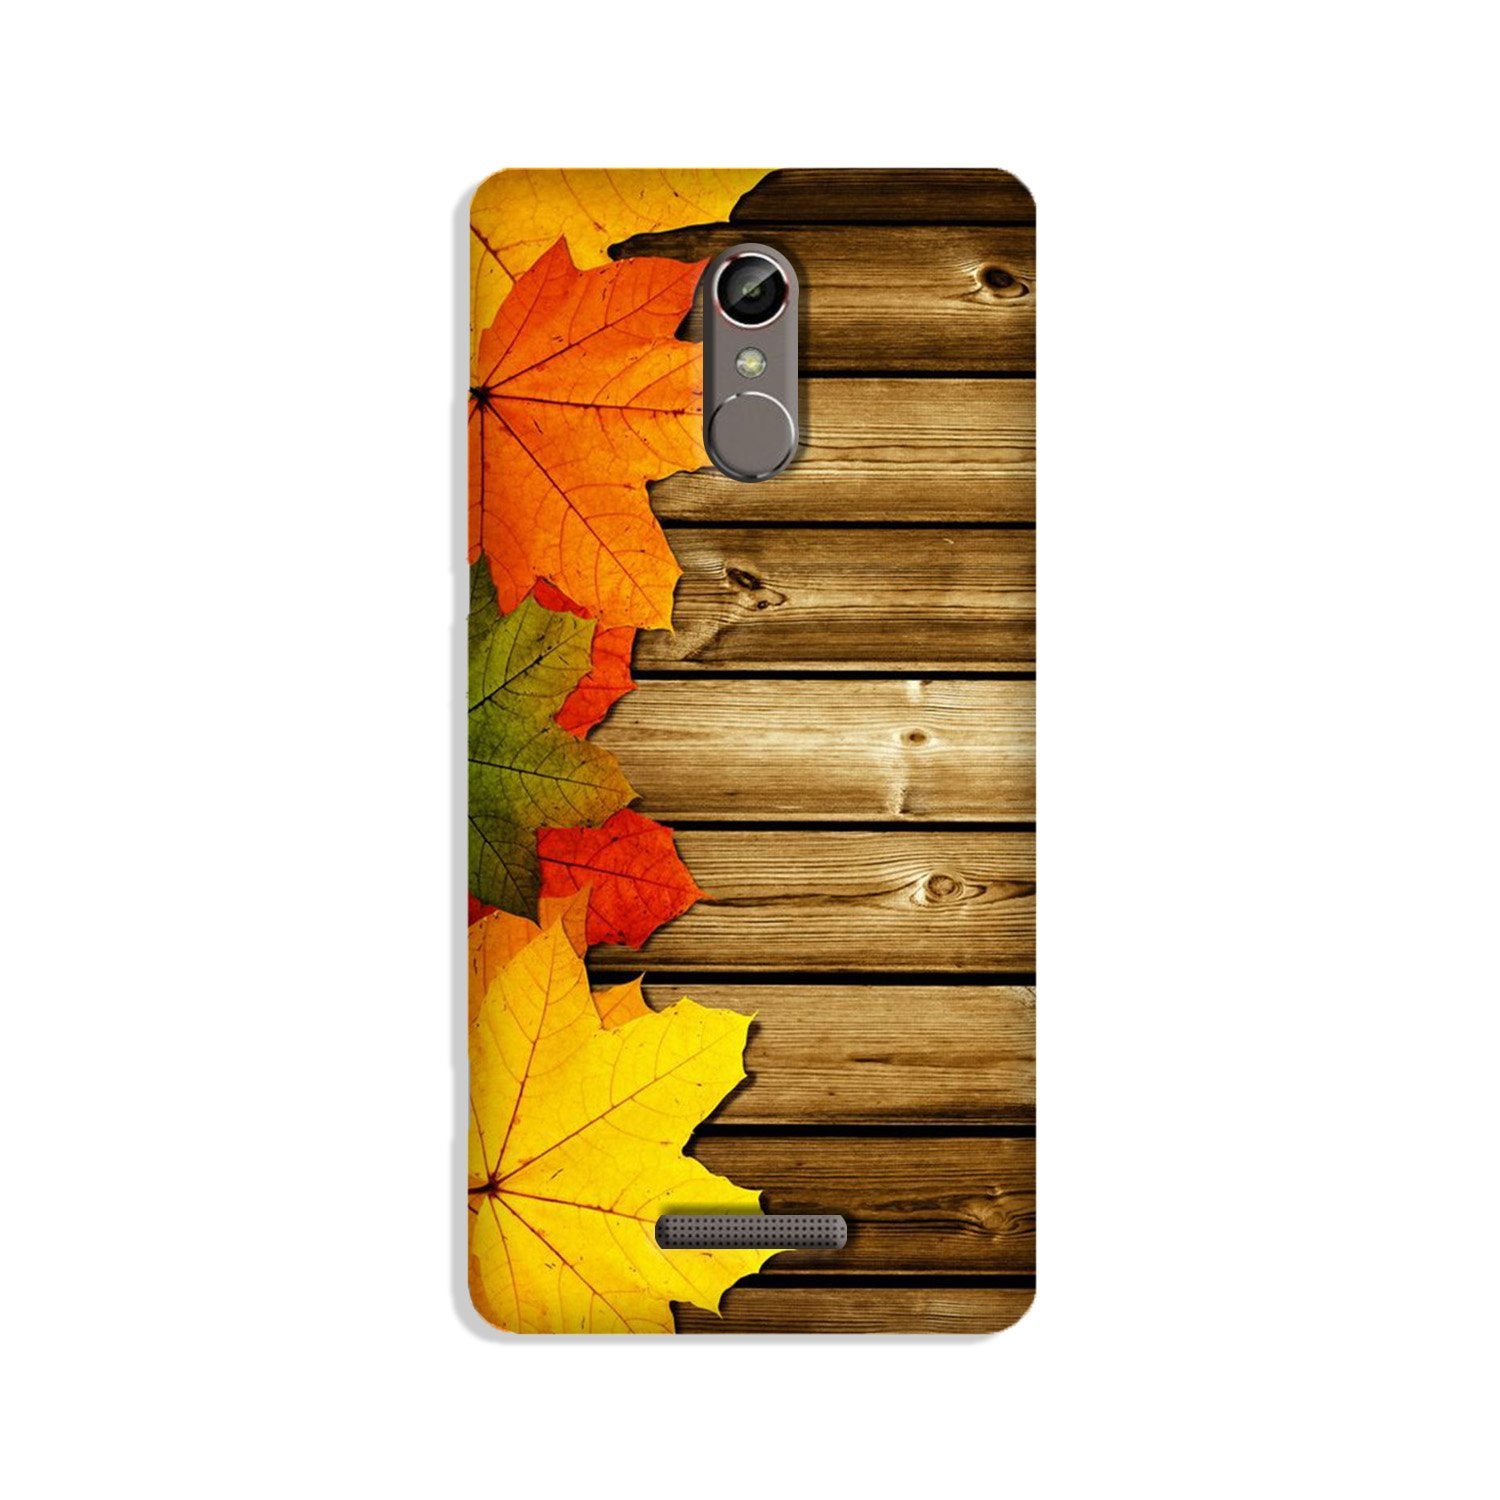 Wooden look Case for Redmi Note 3